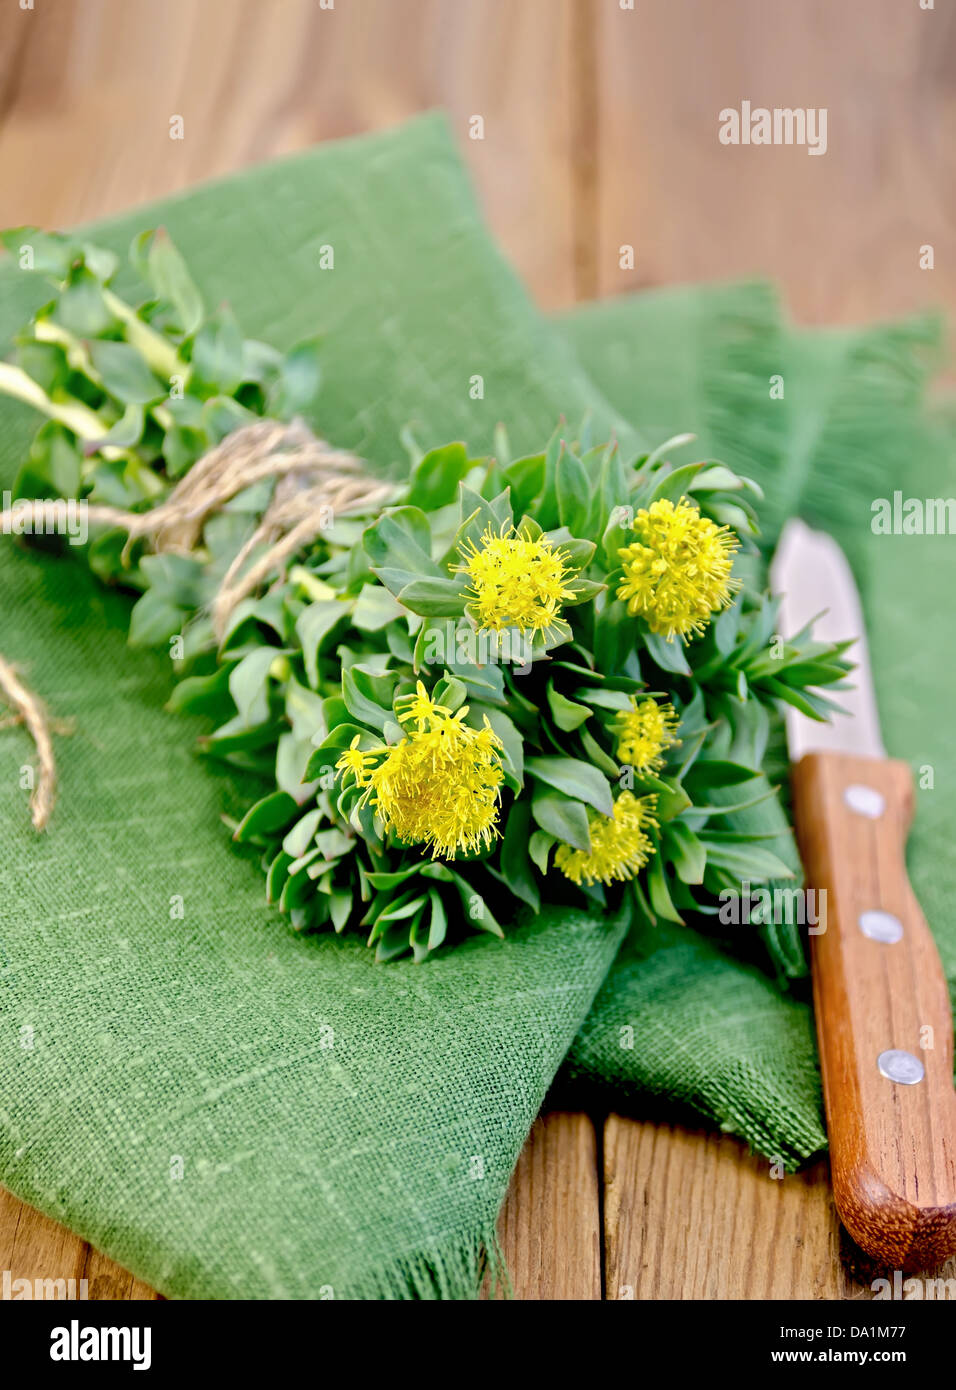 Rhodiola rosea flowers, tied with string with a knife on a green napkin on a background of wooden boards Stock Photo